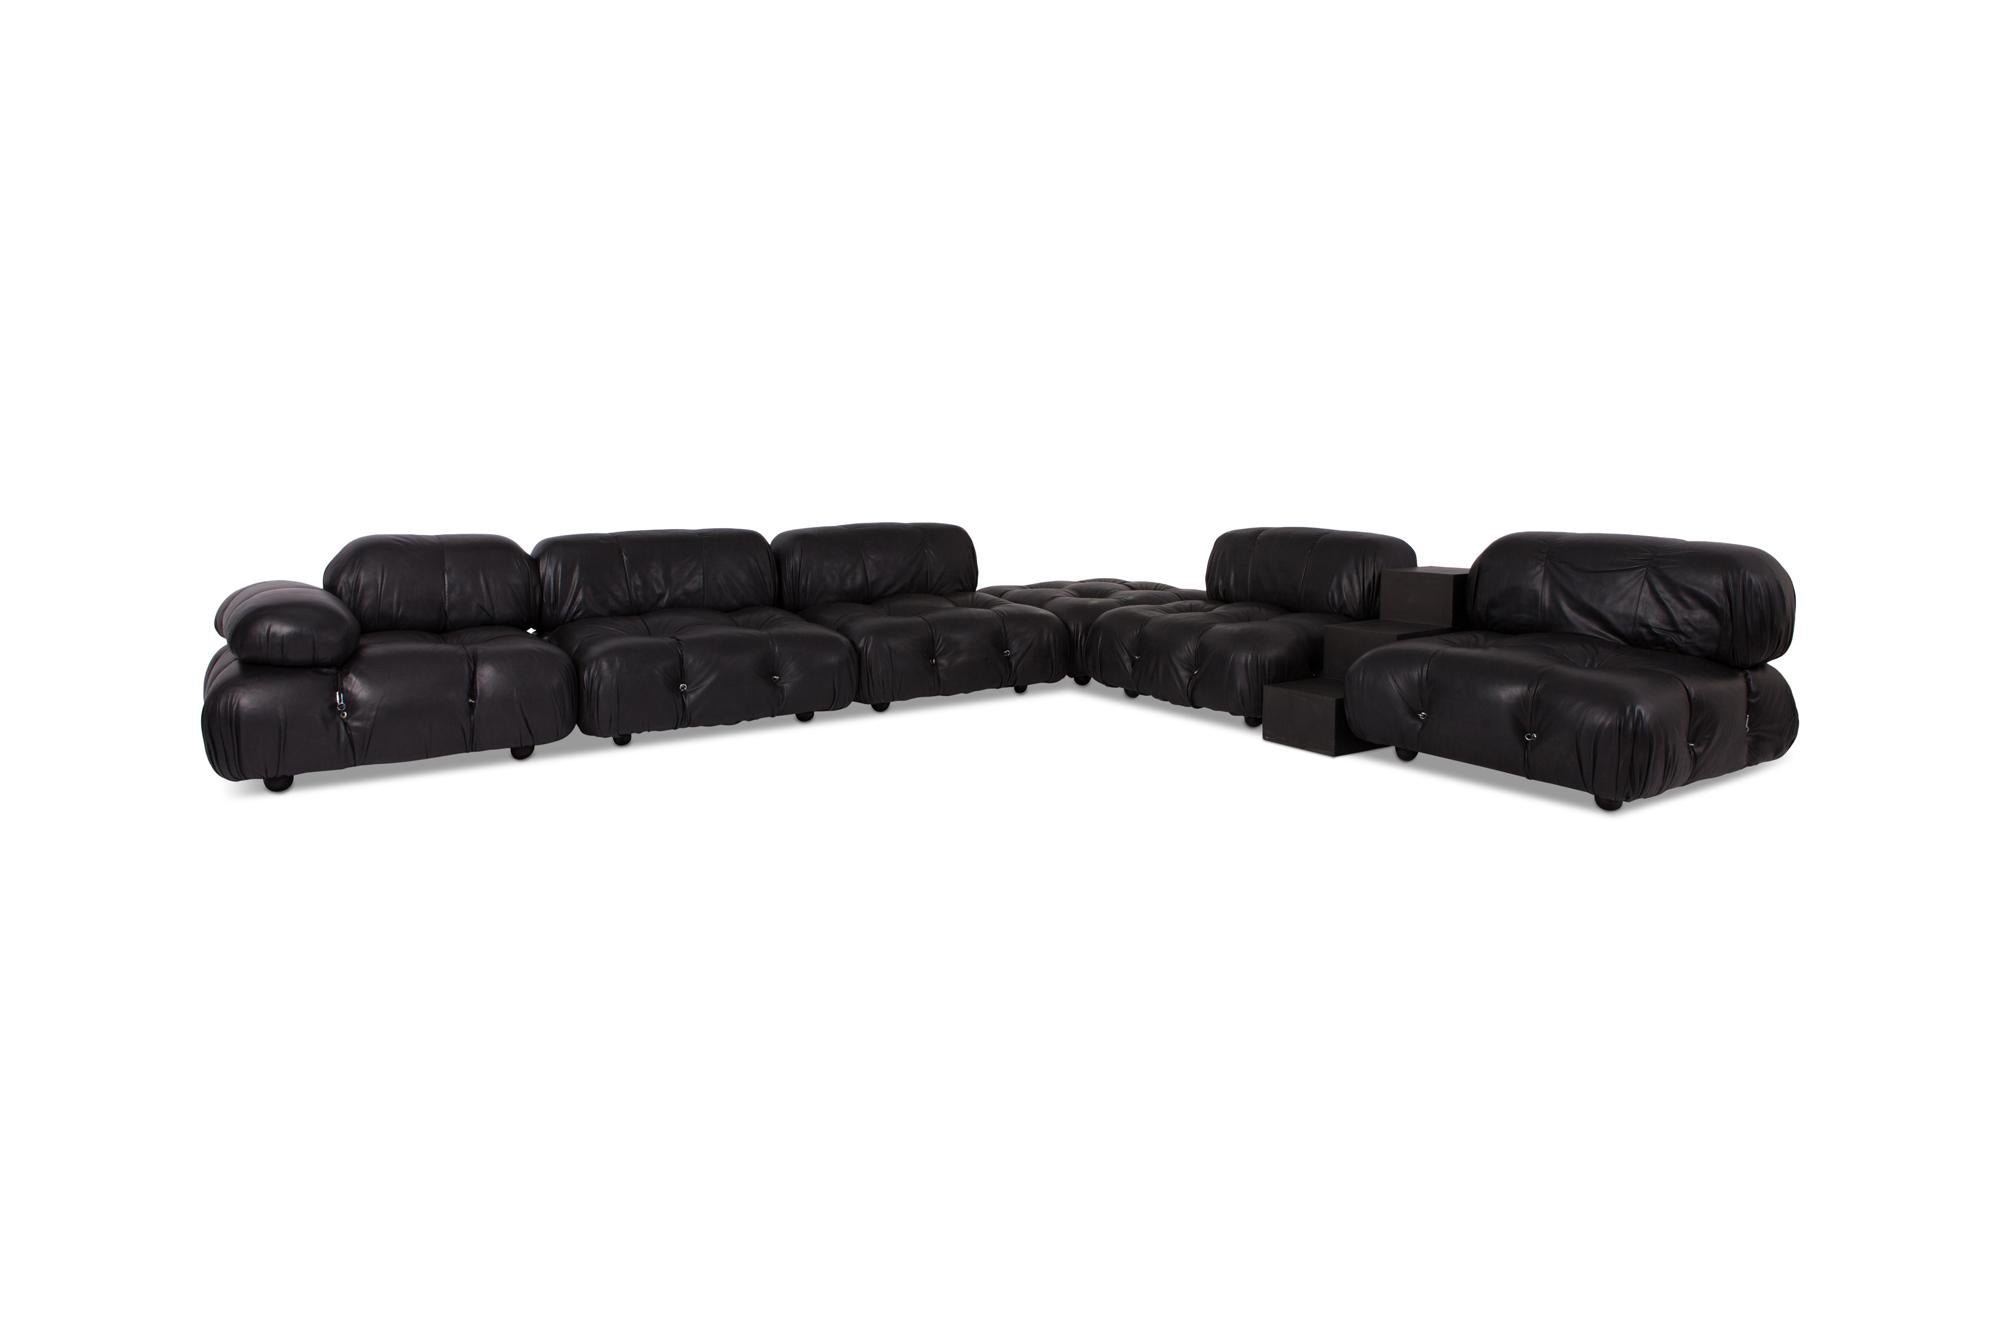 Mario Bellini modular camaleonda sofa in original high quality black leather upholstery, Italy — 1972.

The sofa consists out of six seating elements with different sizes of arm and back rests that are all provided with rings and carabiner clips